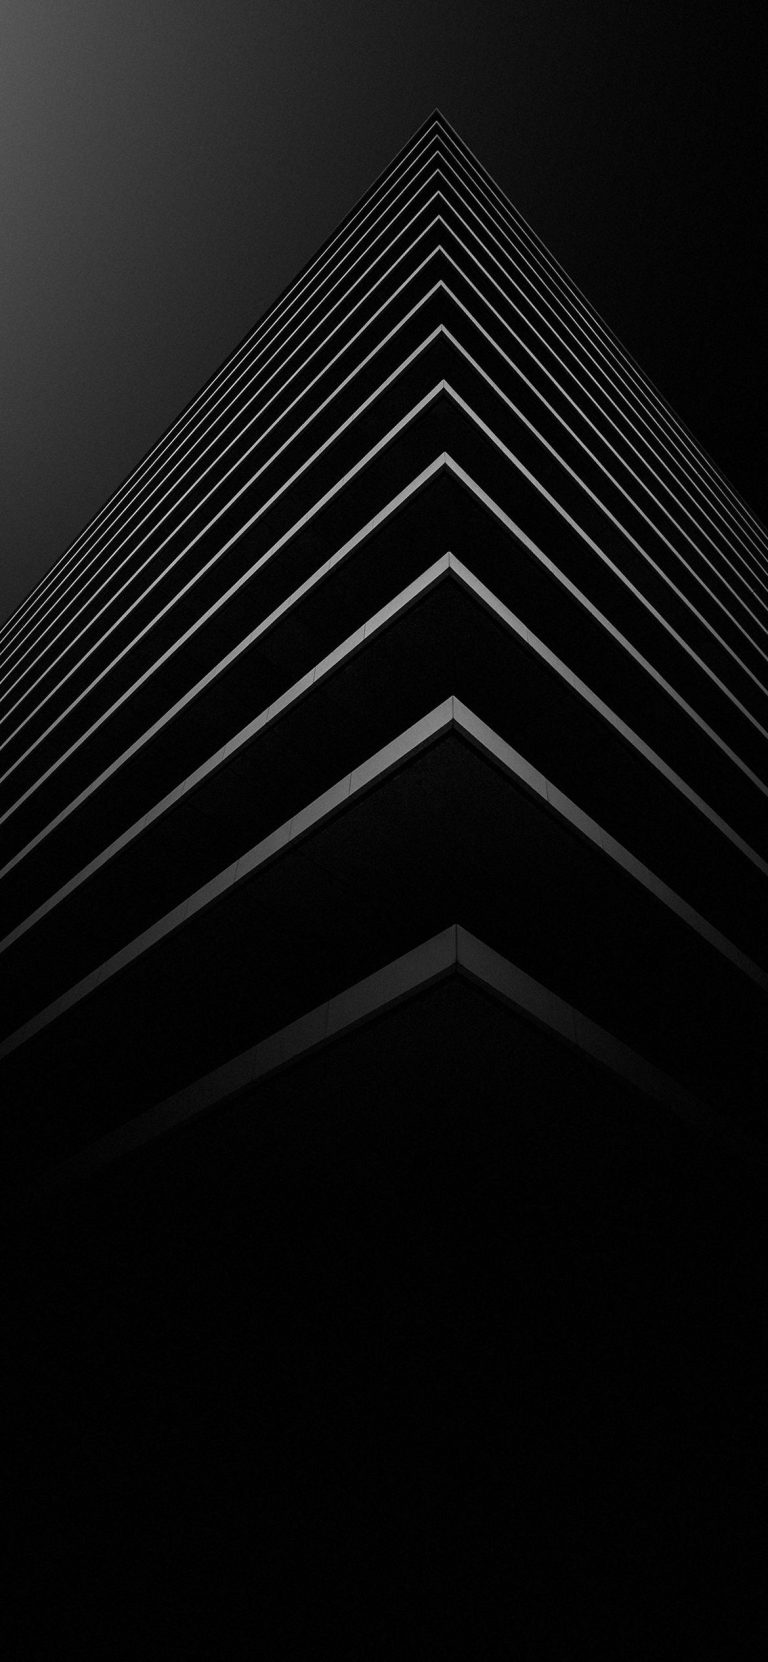 Black and White iPhone Wallpaper - 084